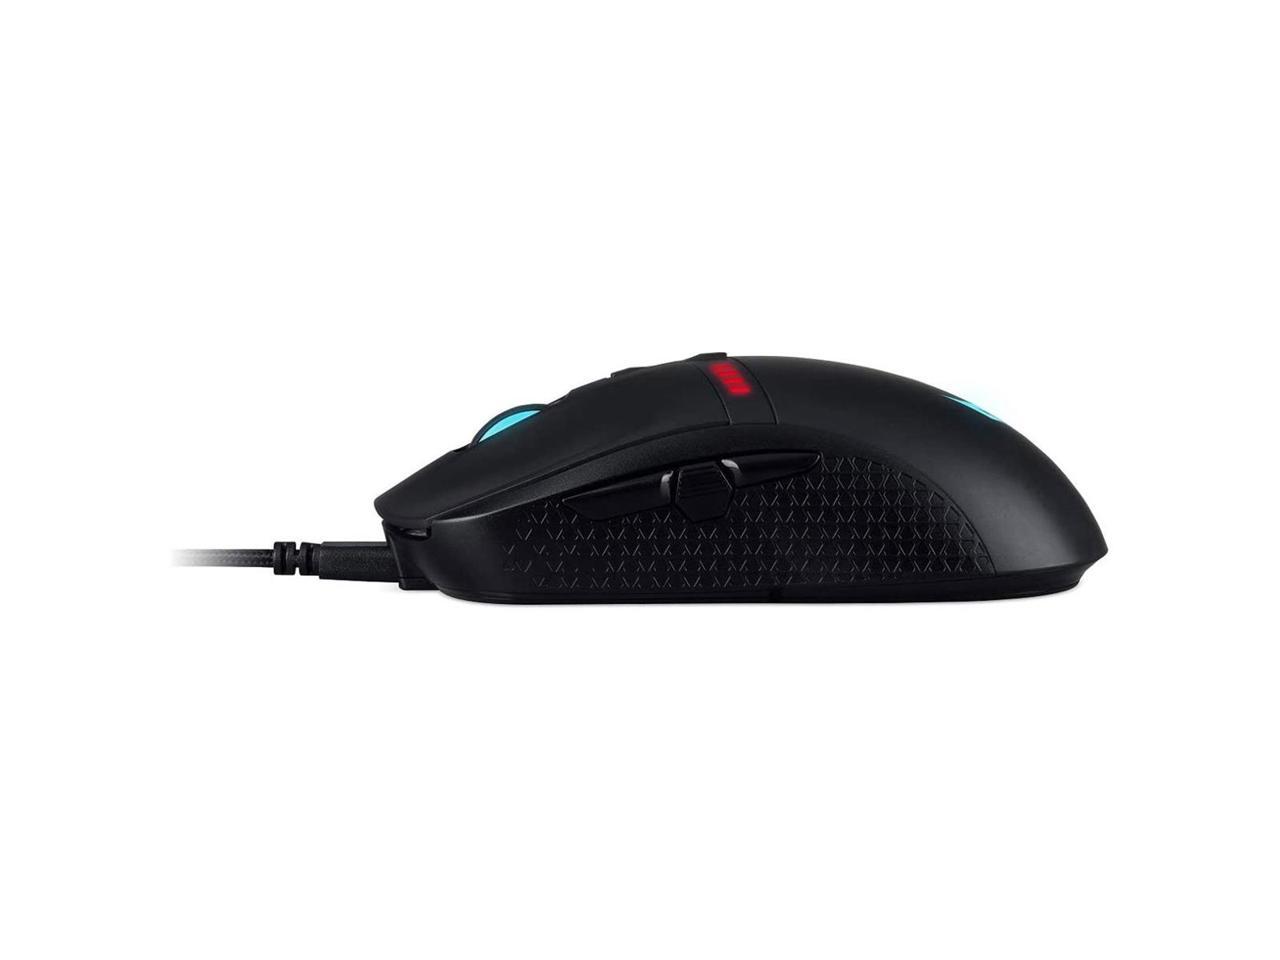 Acer Predator Cestus 350 Wired Gaming Mouse, Black #GP.MCE11.00Q - image 5 of 10